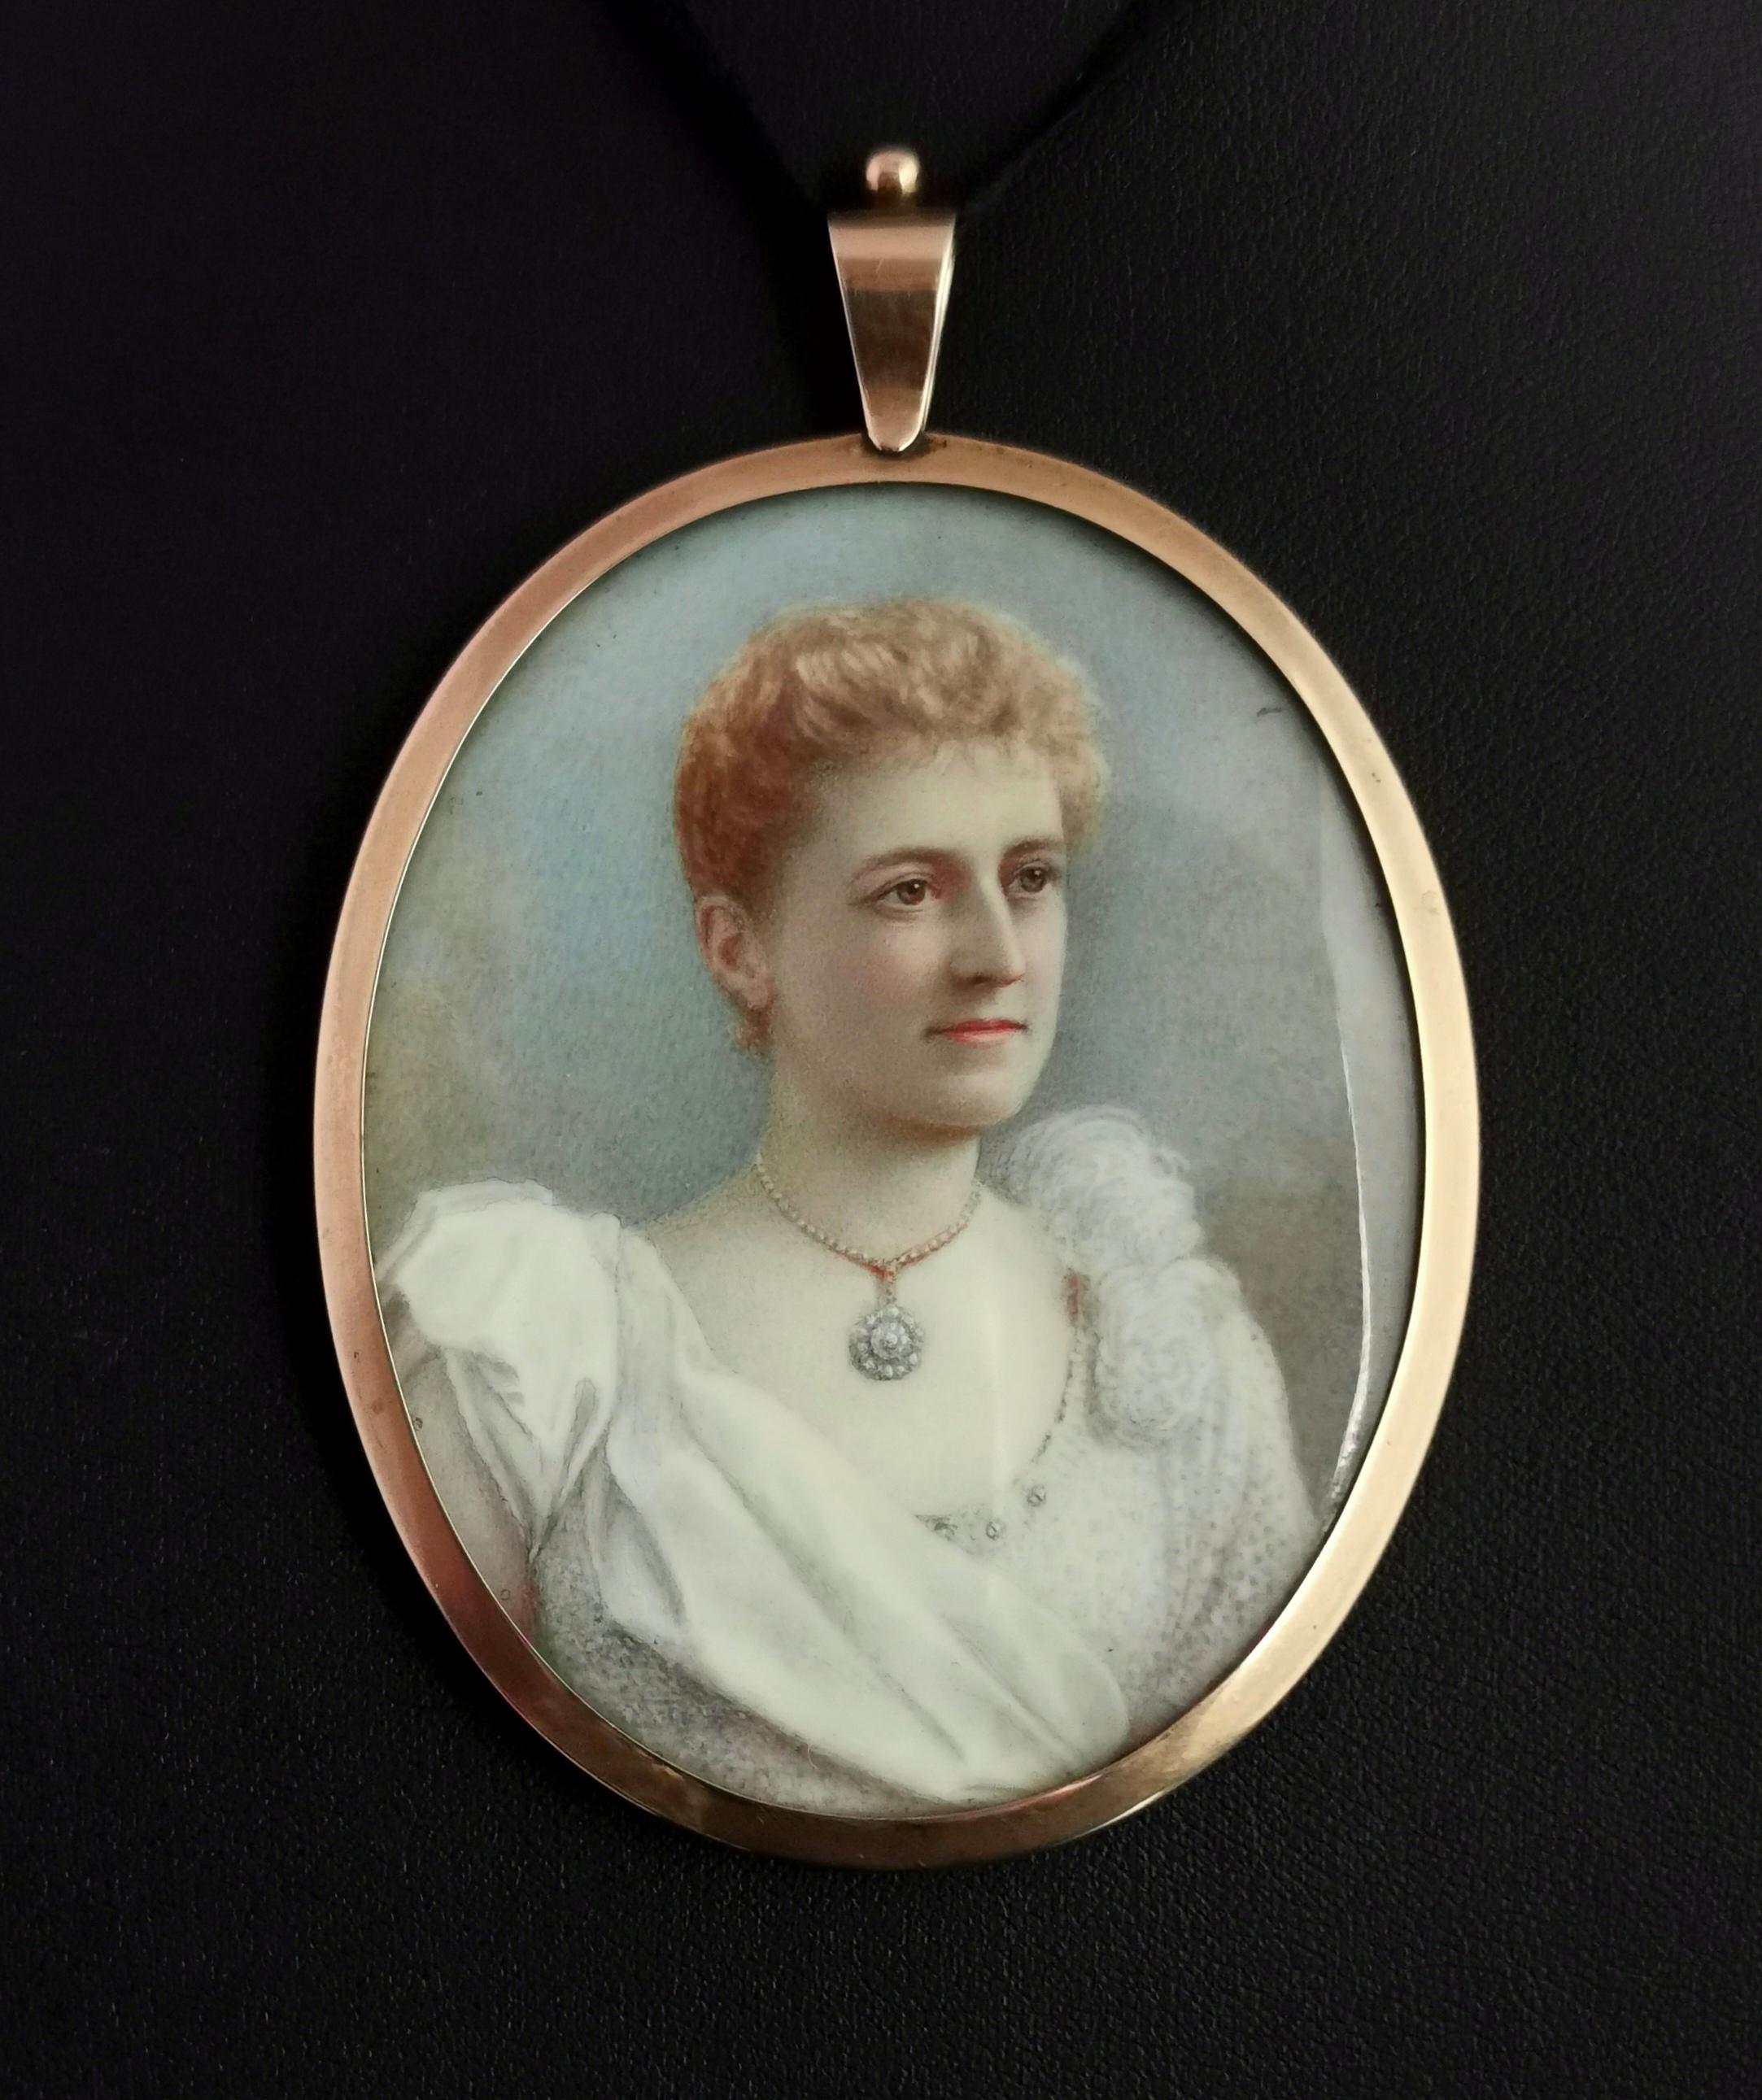 A very fine antique portrait miniature in gold with a pendant fitting.

It is a large piece with a rich 9 karat gold bezel frame with glazed covers either side, the front features the most beautiful hand painted portrait of a lady in a dress with a